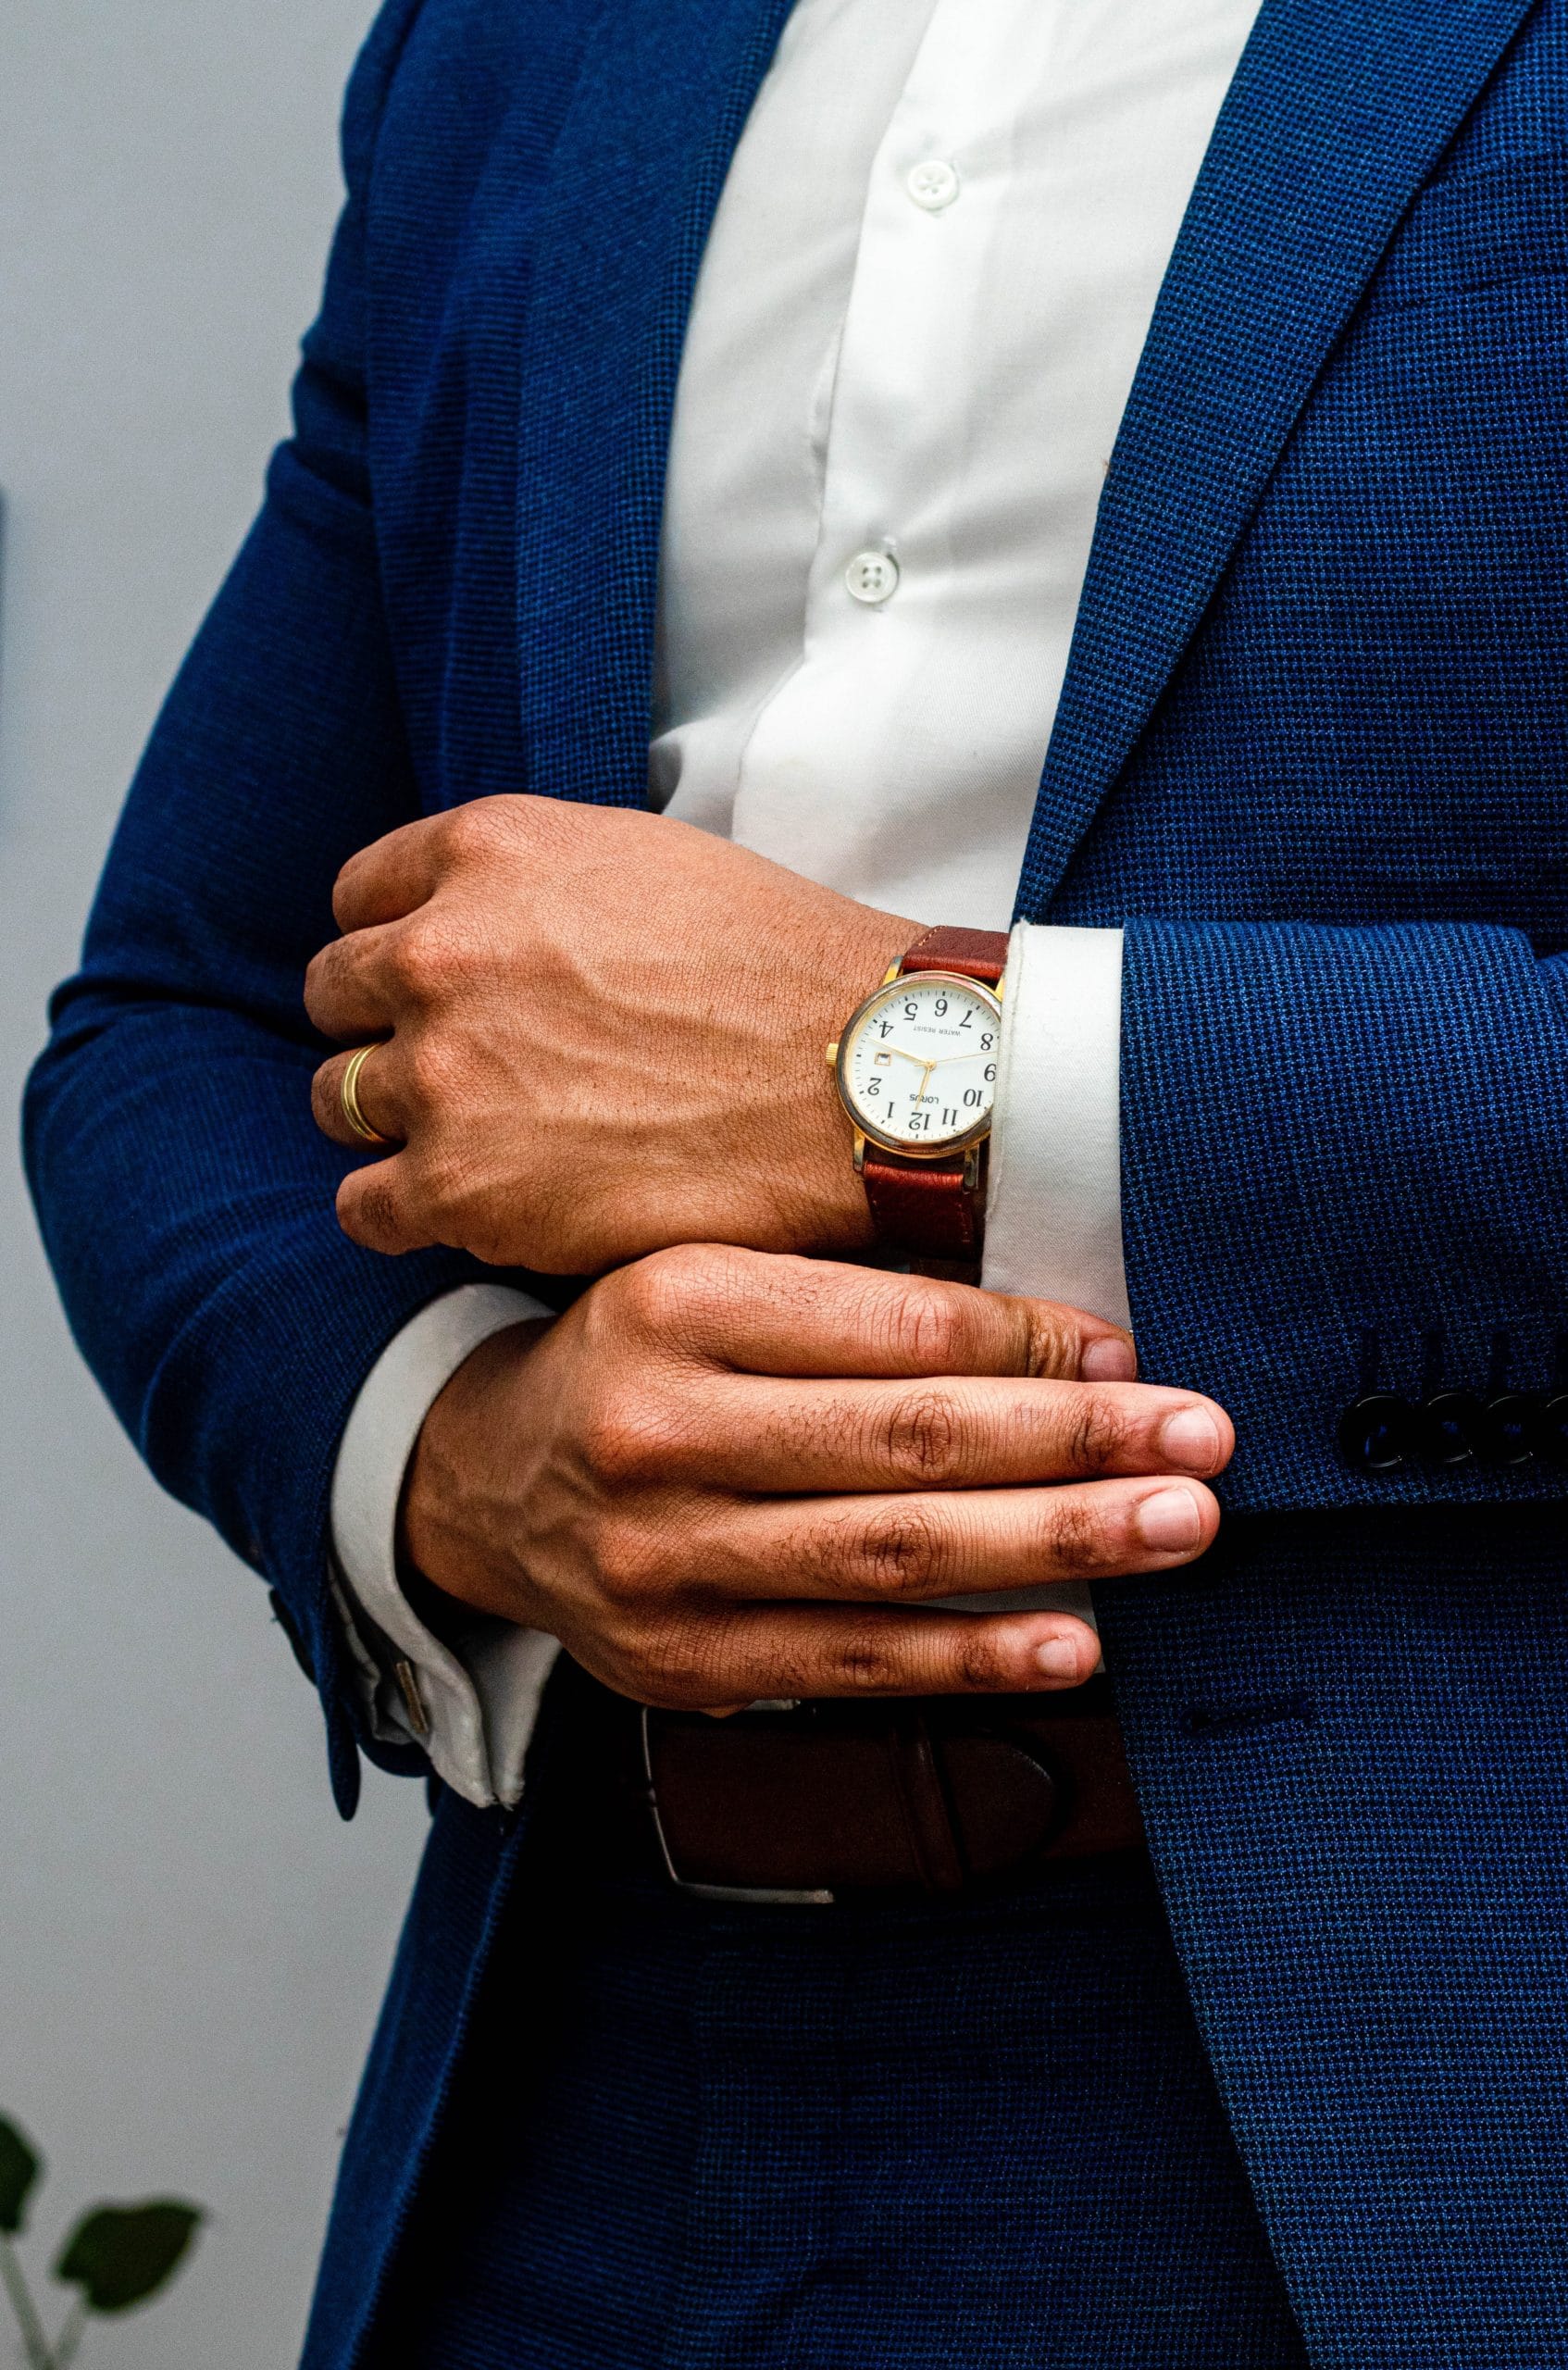 27 Things Male Realtors Should Never, Ever, Wear to Work